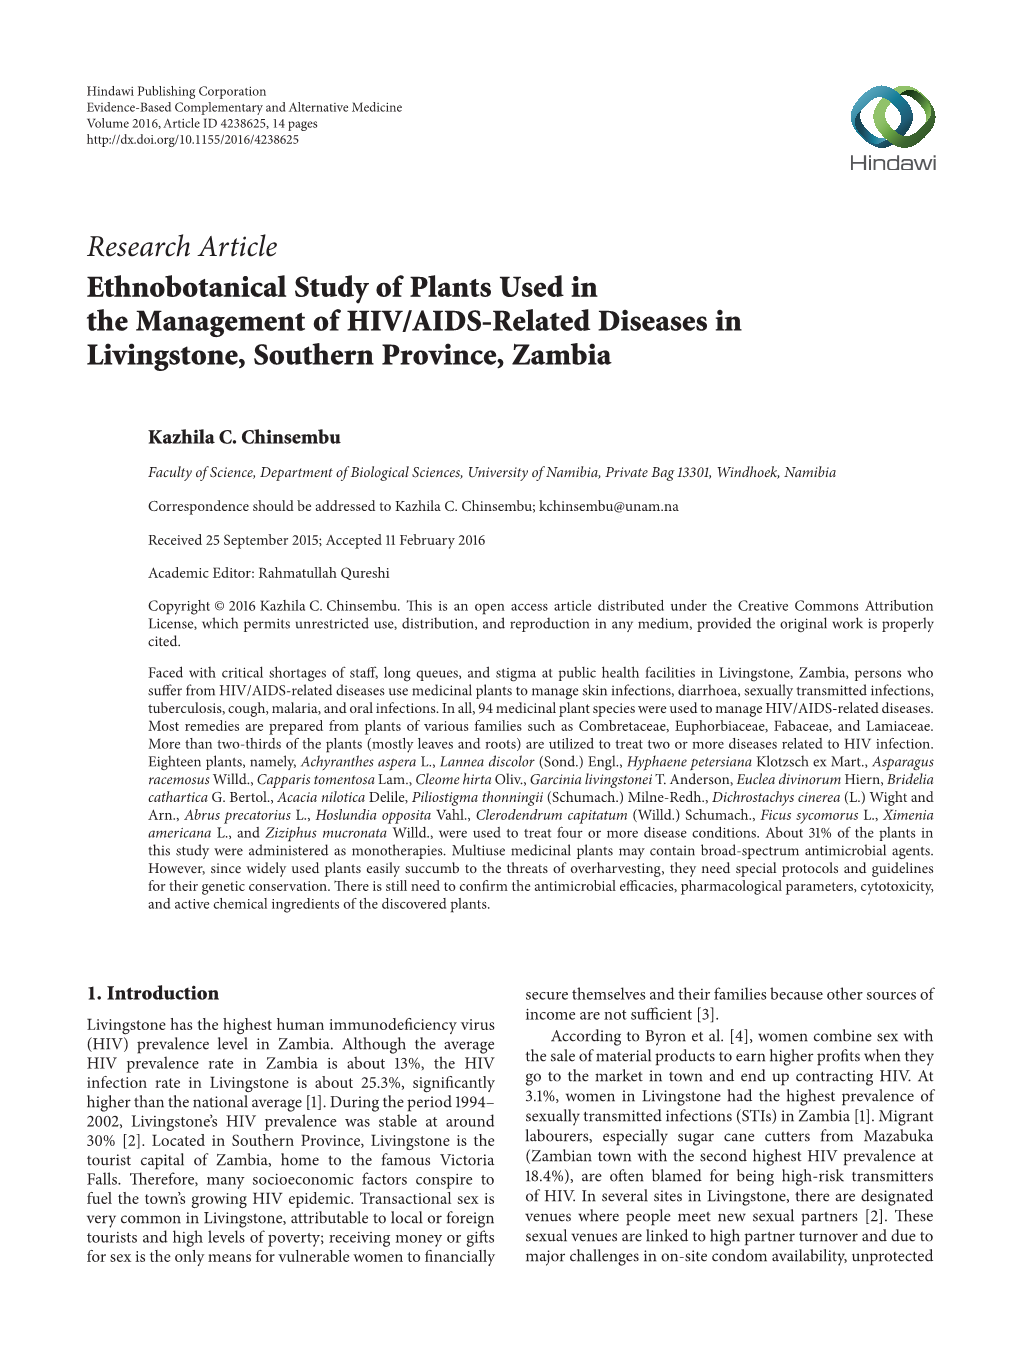 Ethnobotanical Study of Plants Used in the Management of HIV/AIDS-Related Diseases in Livingstone, Southern Province, Zambia